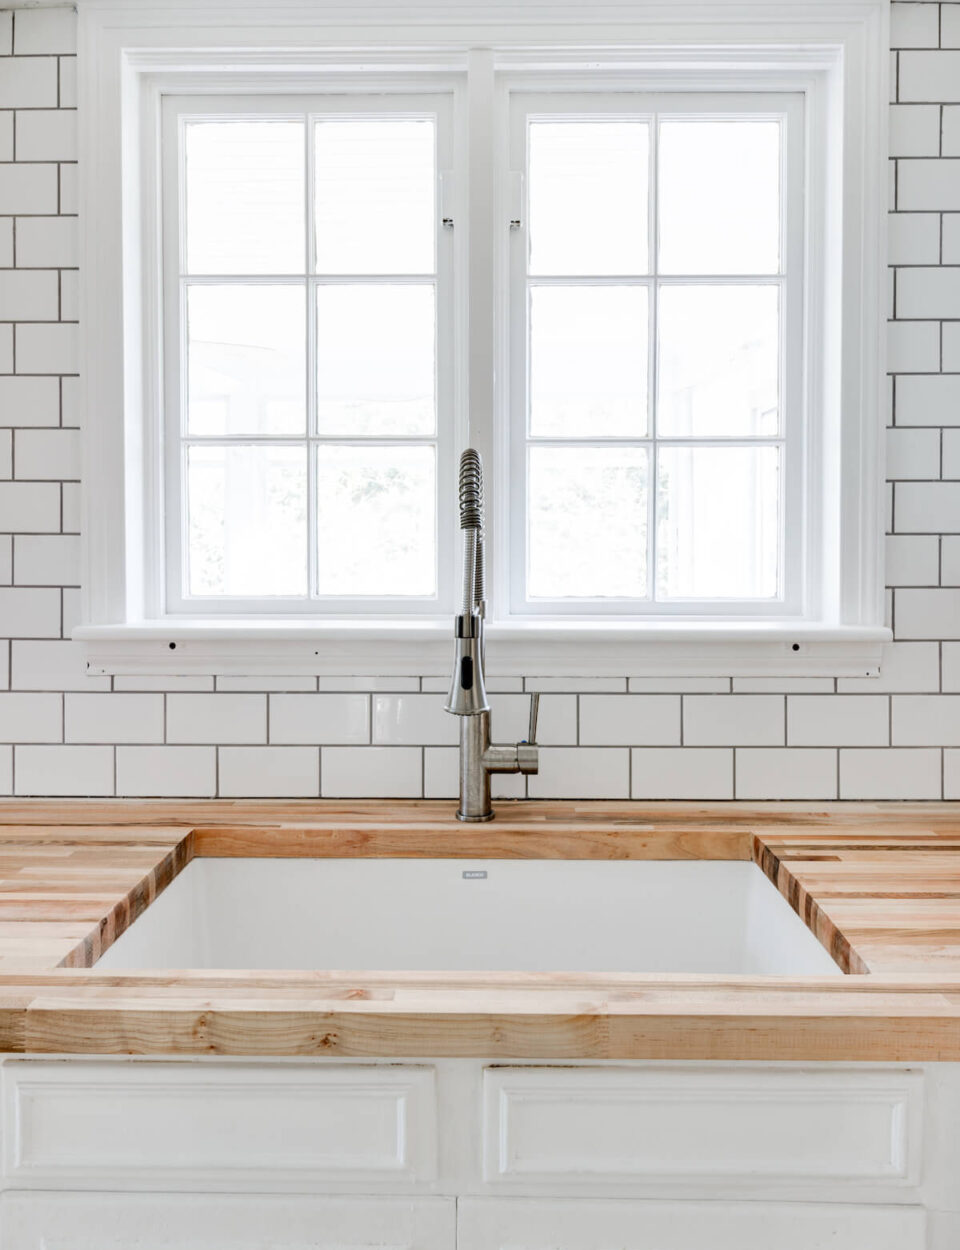 wood counters, undermount sink, and subway tile